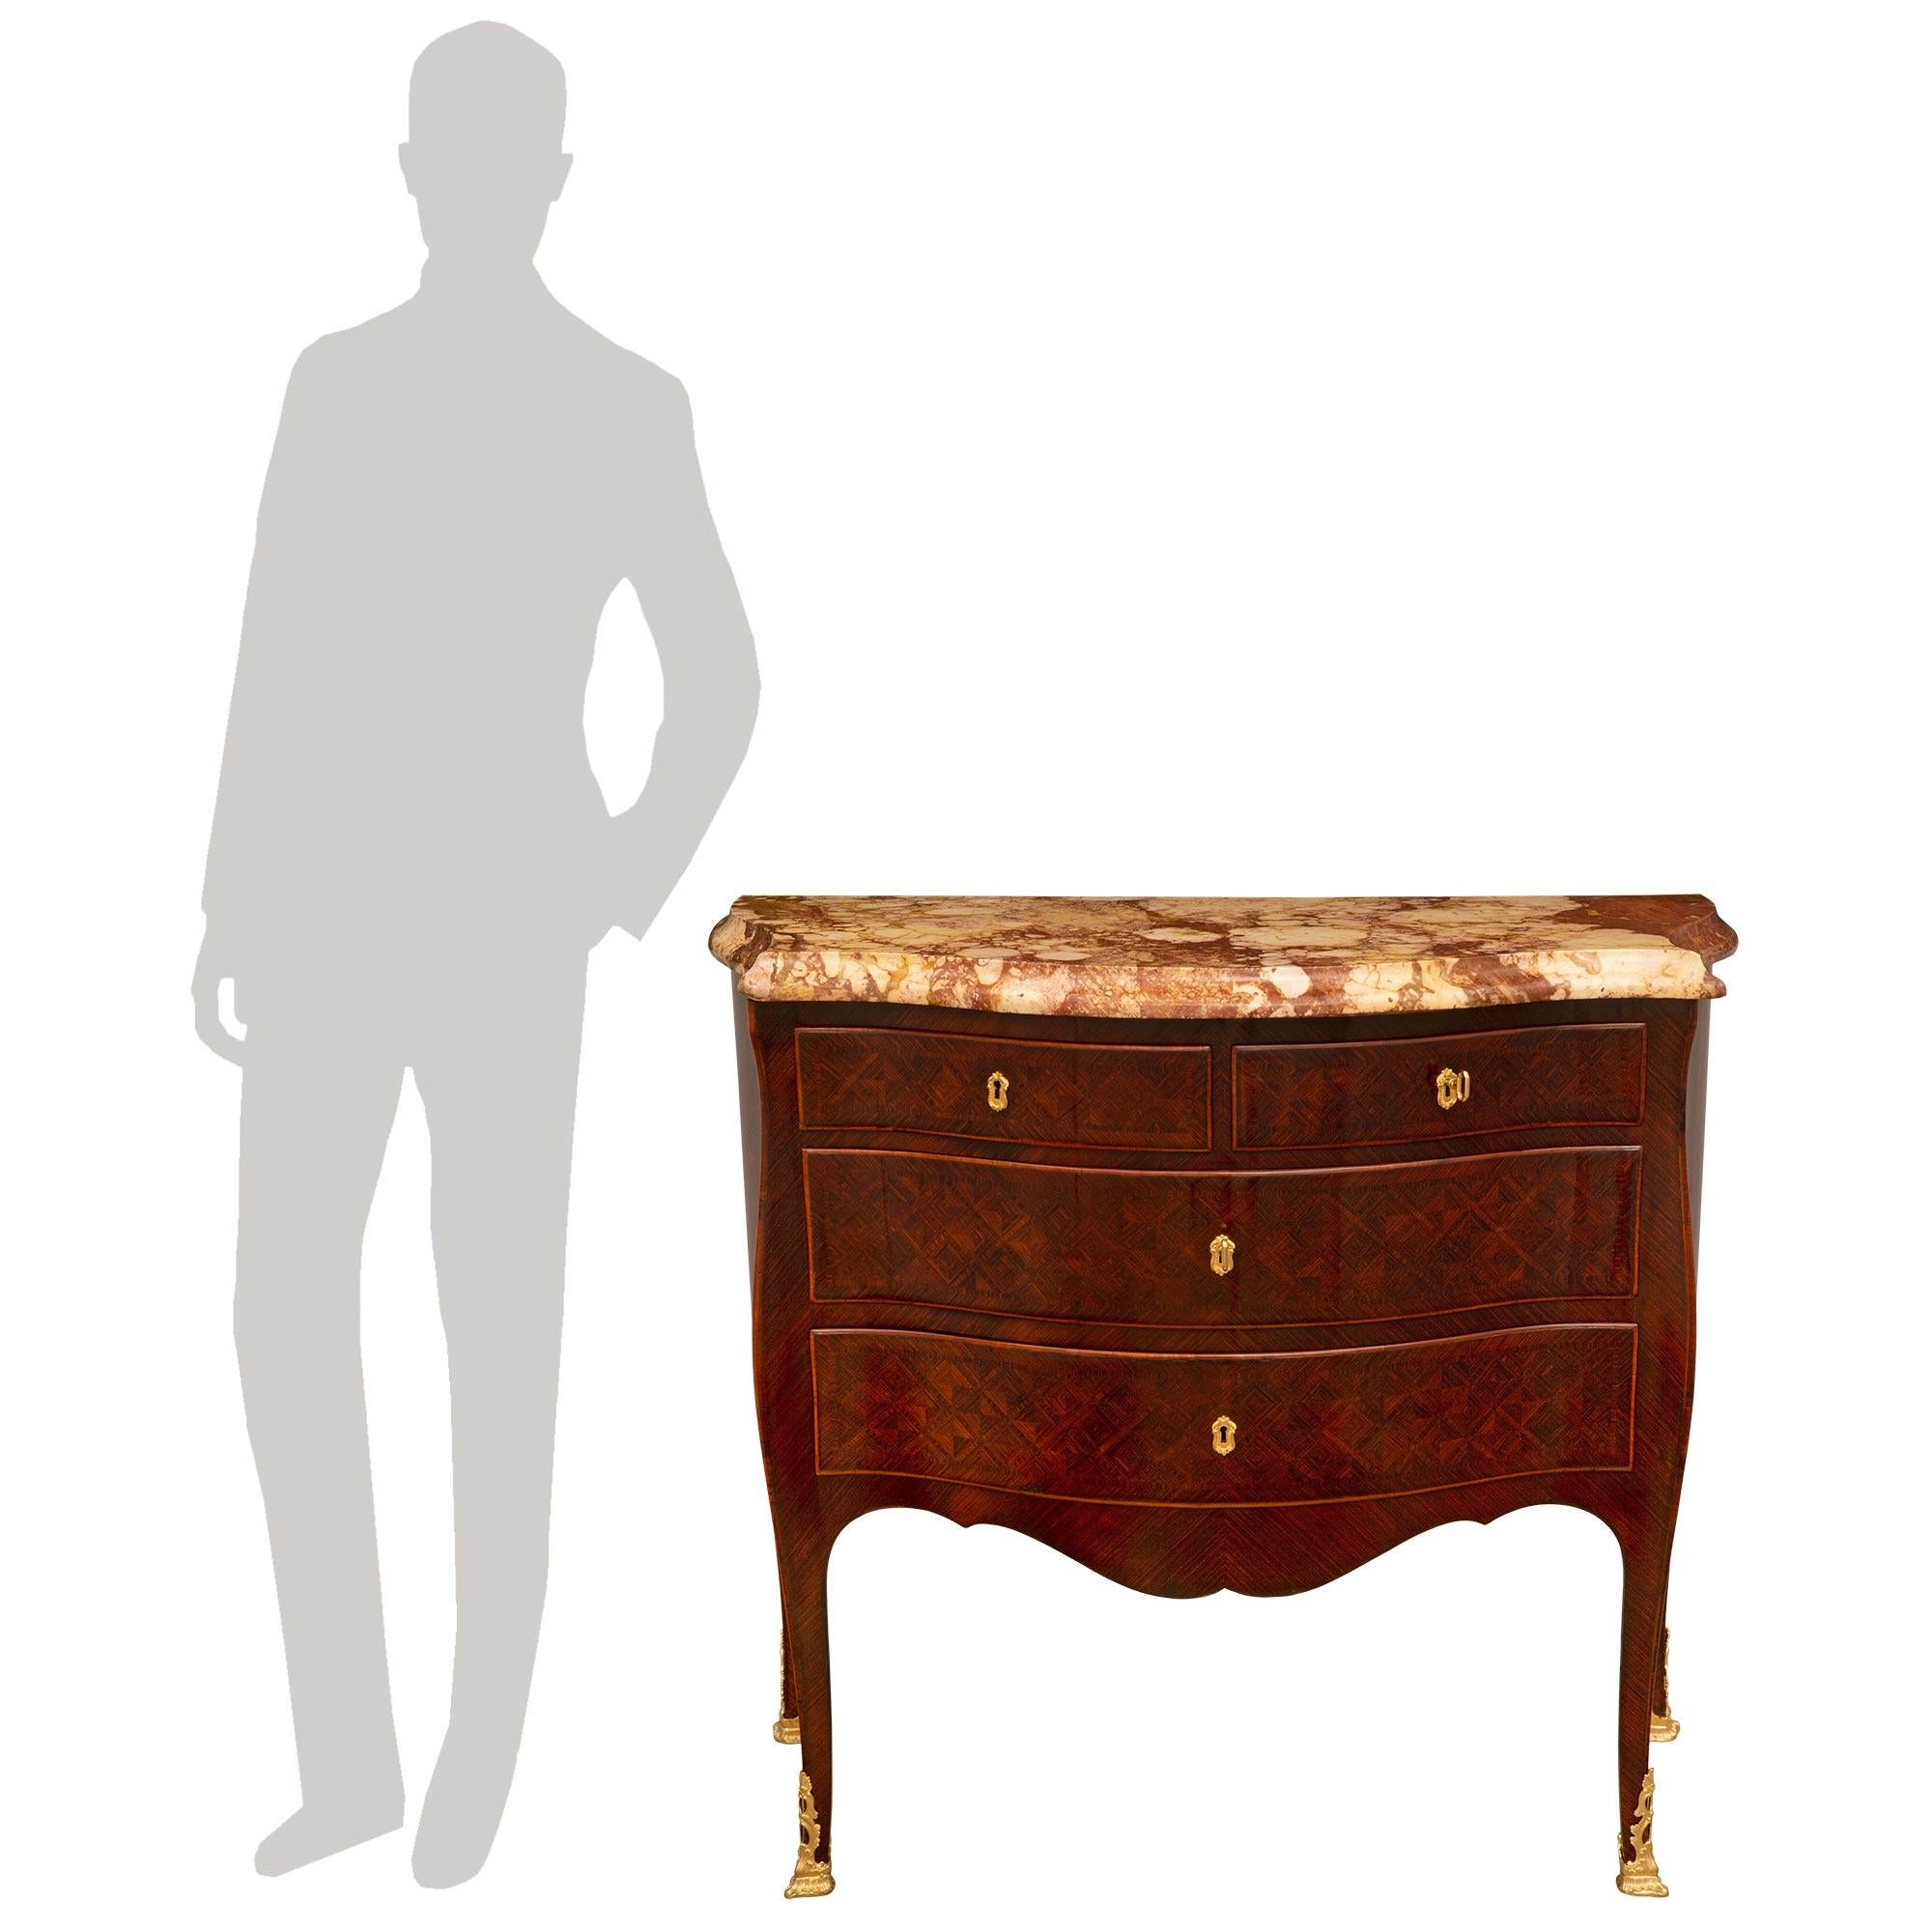 A stunning and extremely decorative pair of Italian early 19th century Louis XV st. Kingwood, ormolu and Brèche de Sicile marble commodes. Each four drawer chest is raised by elegant lightly curved legs with richly chased pierced fitted foliate